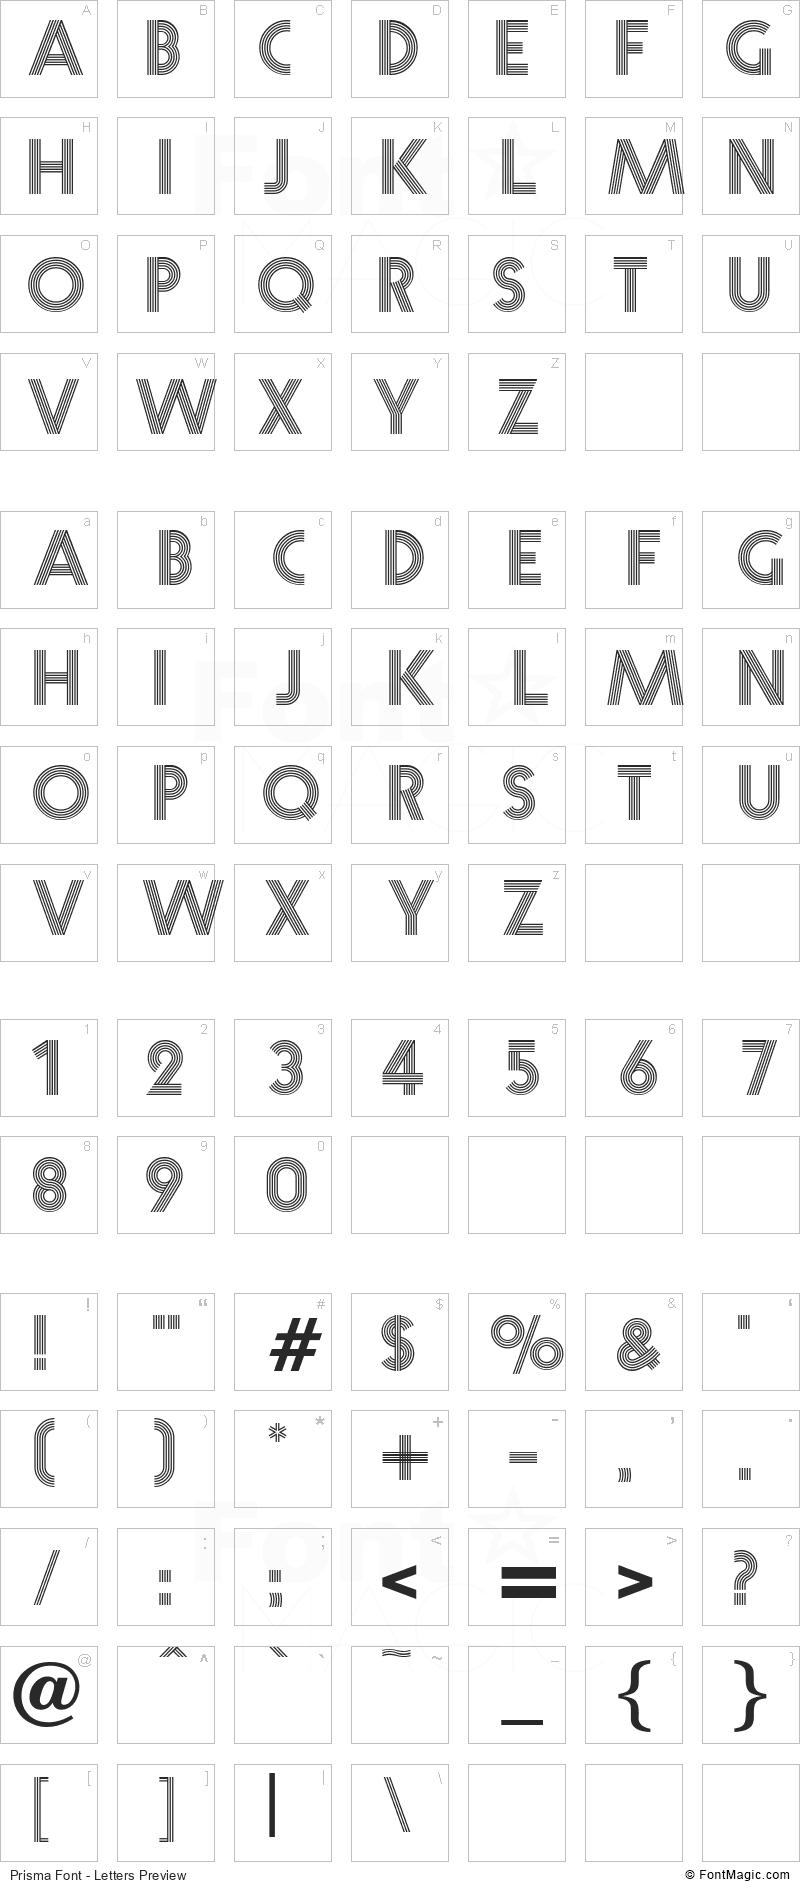 Prisma Font - All Latters Preview Chart